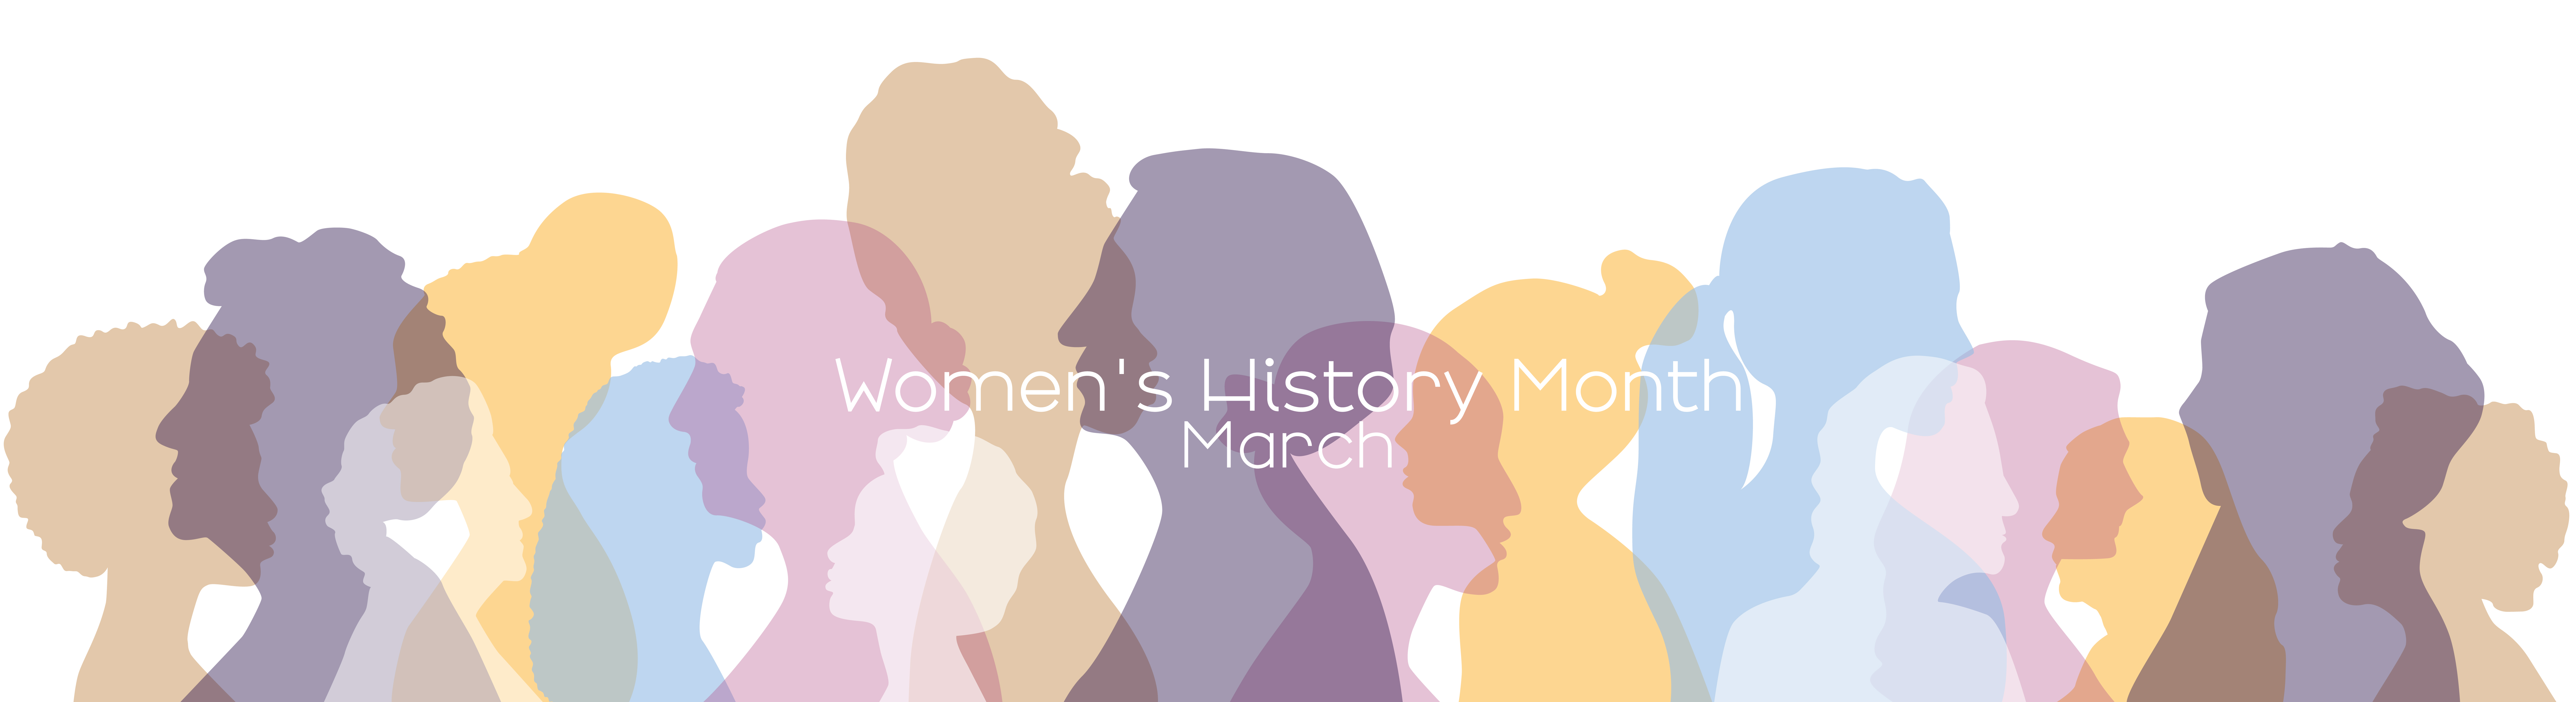 Mulitcolored women silhouettes in a row with the words "Women's History Month March" 